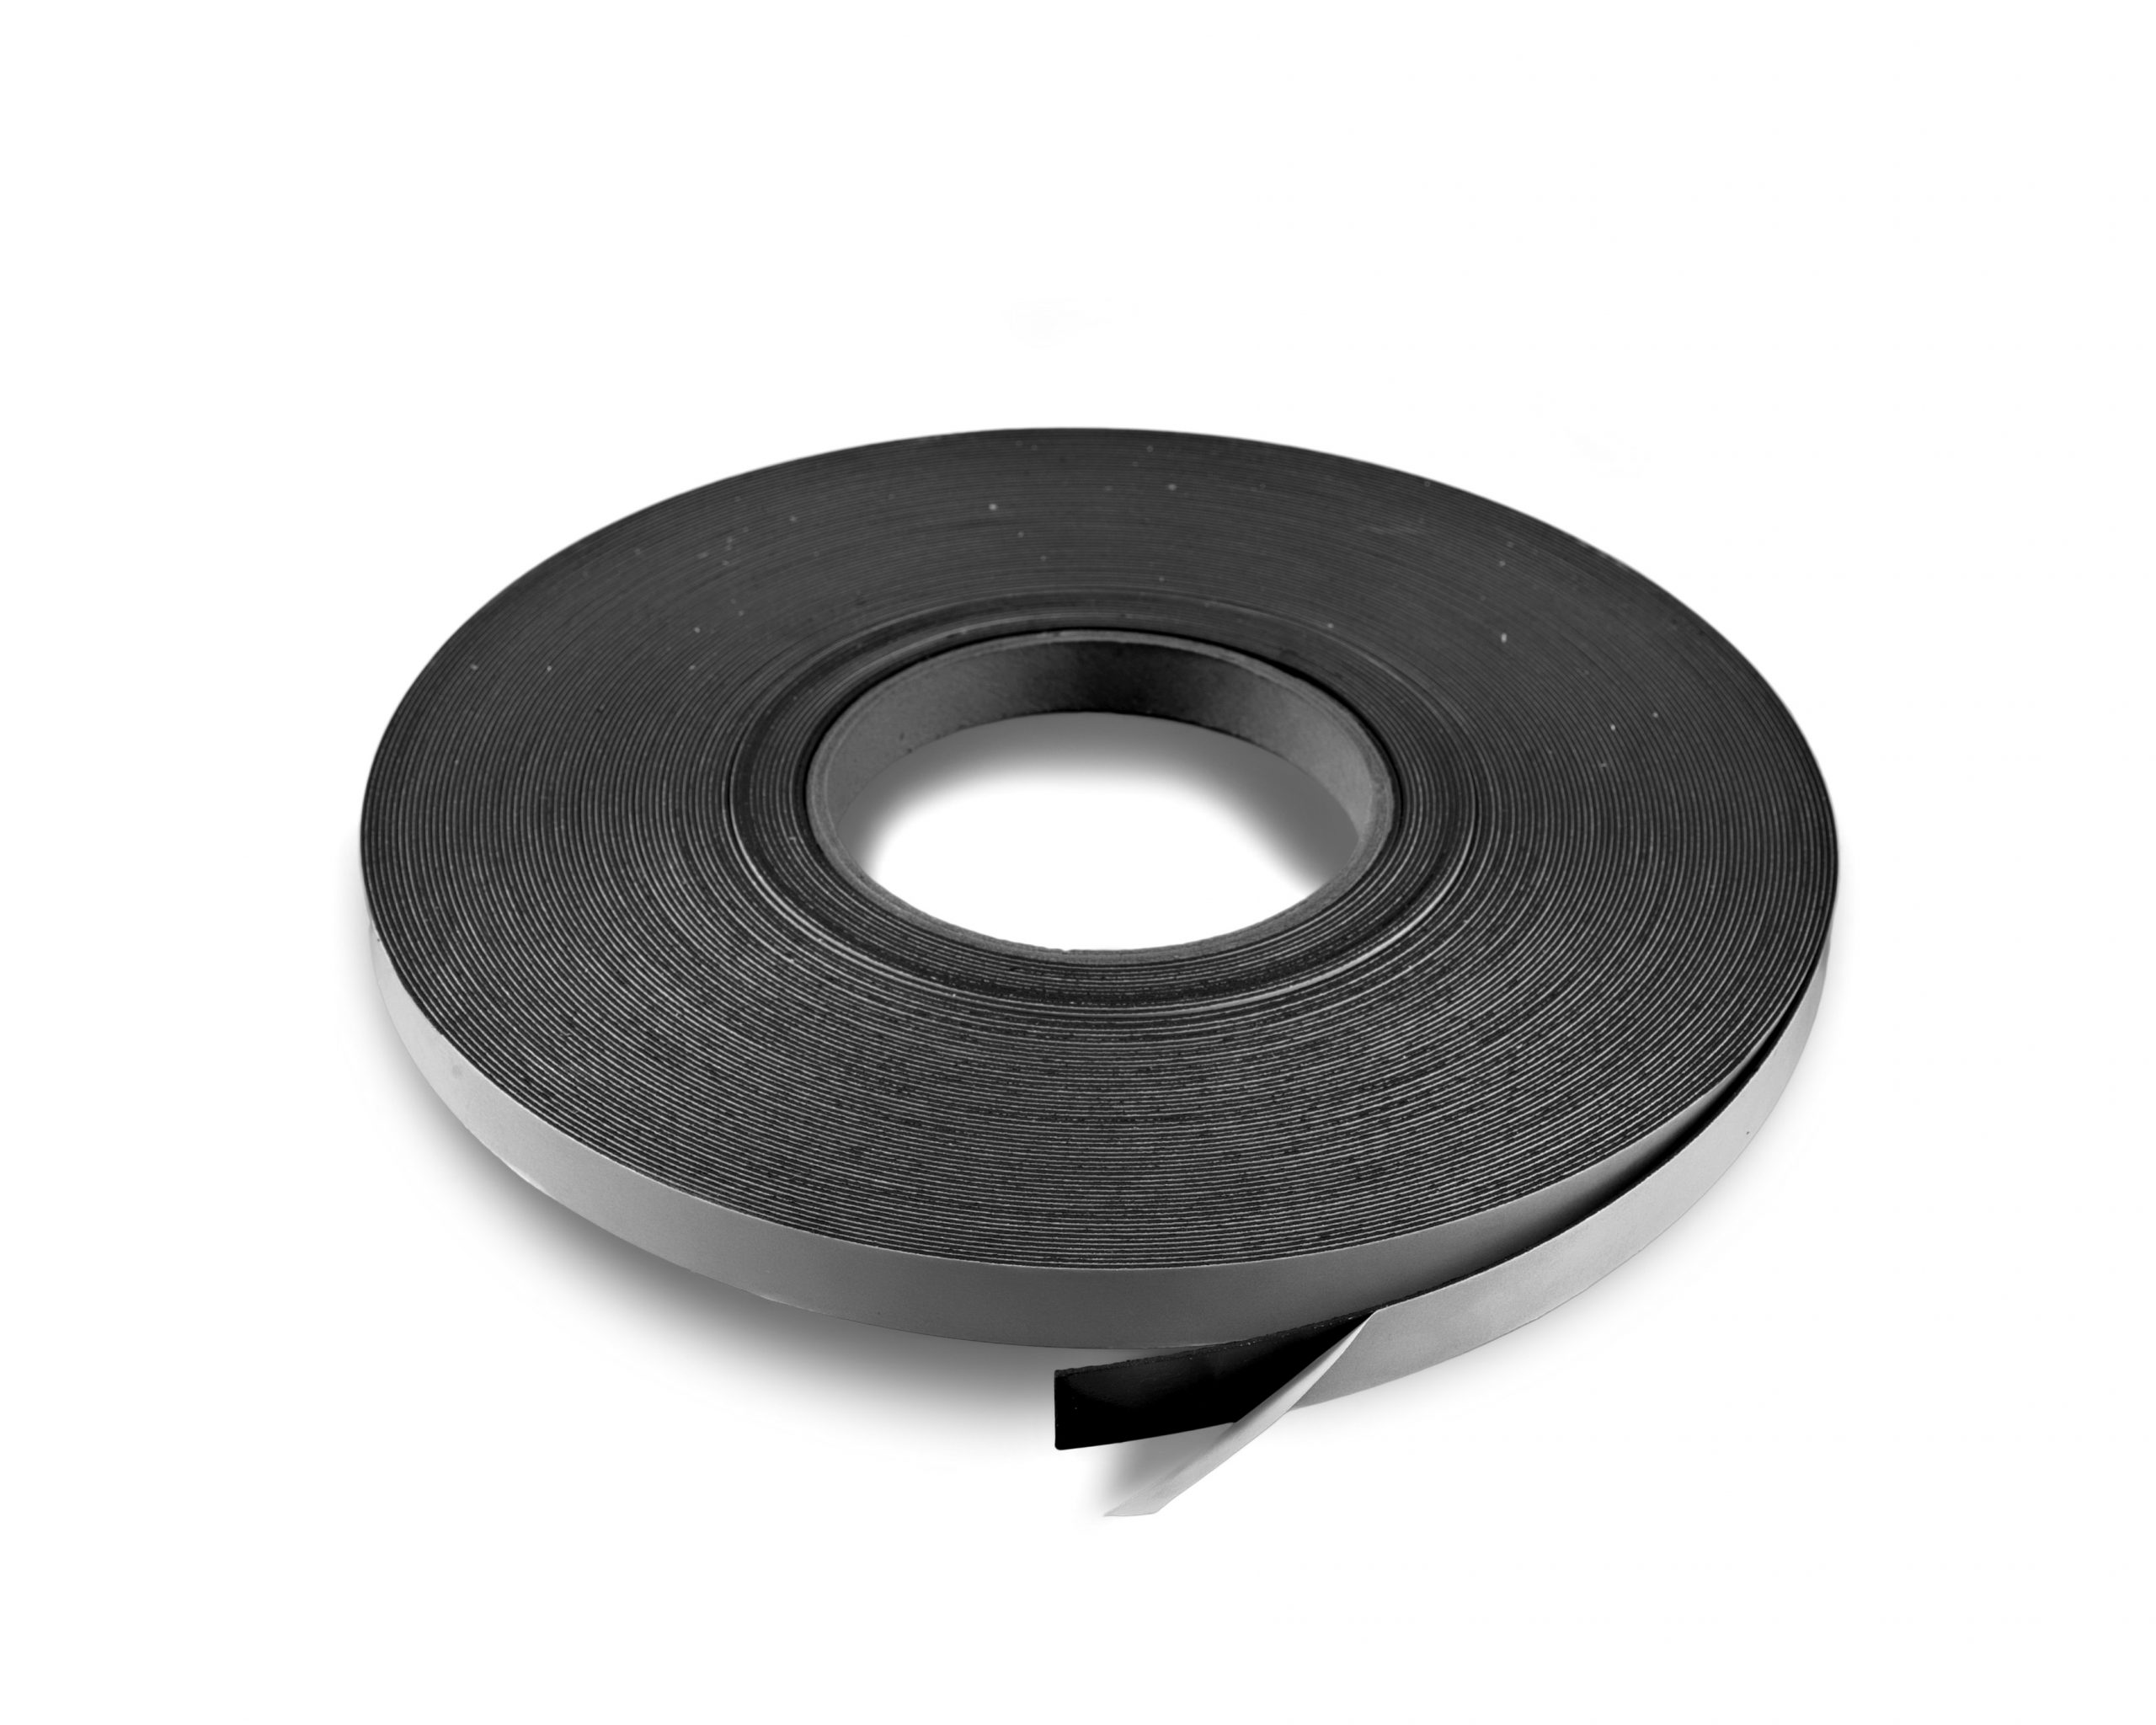 5 Adhesive Magnetic Tape 60 mil Strip Roll - Discount Magnet